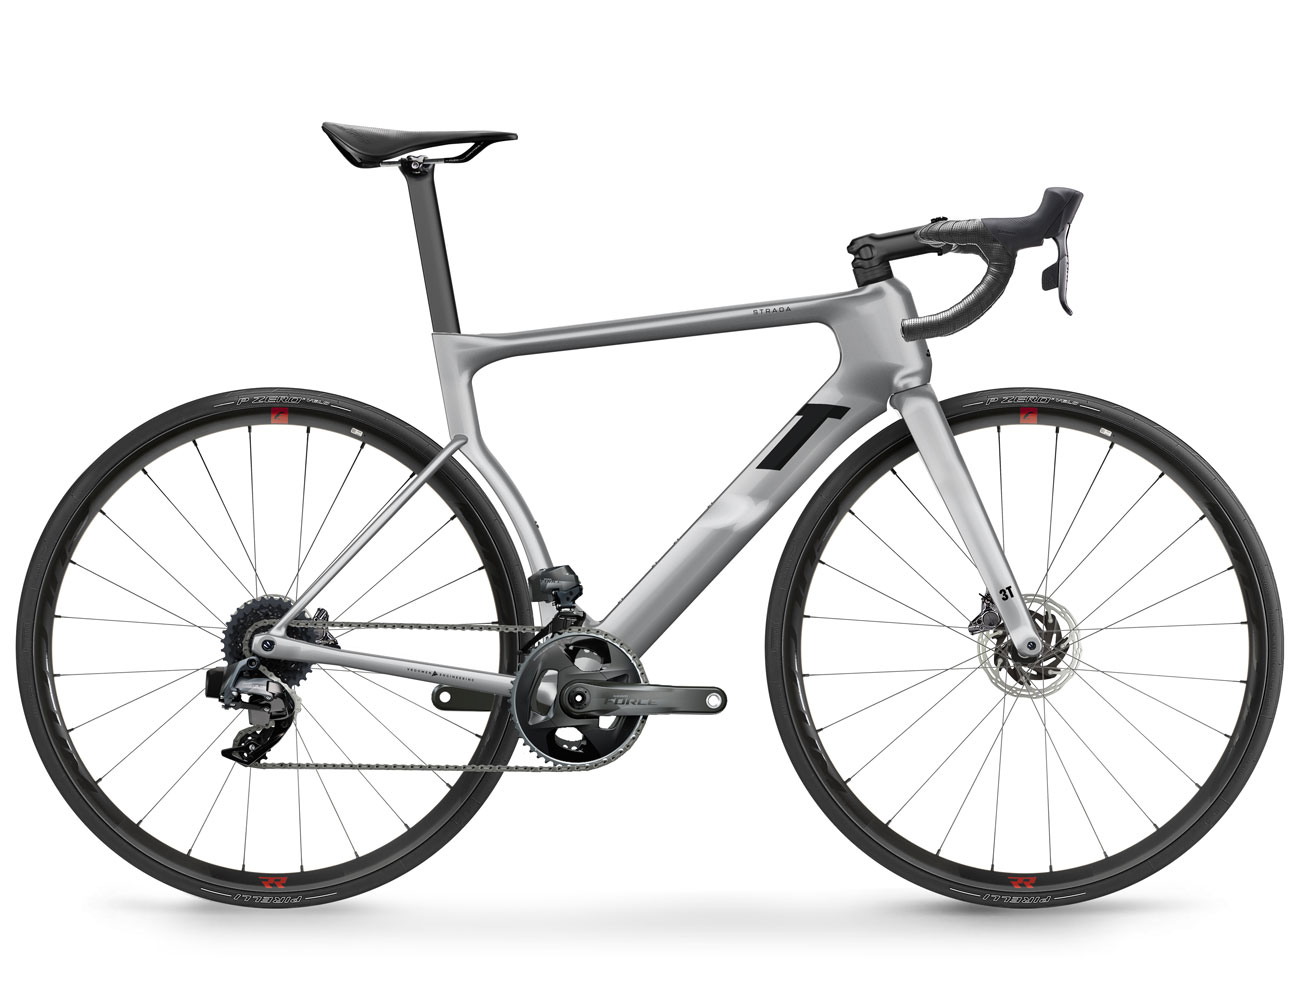 VELO ROUTE 3T STRADA ICR FORCE AXS X 2